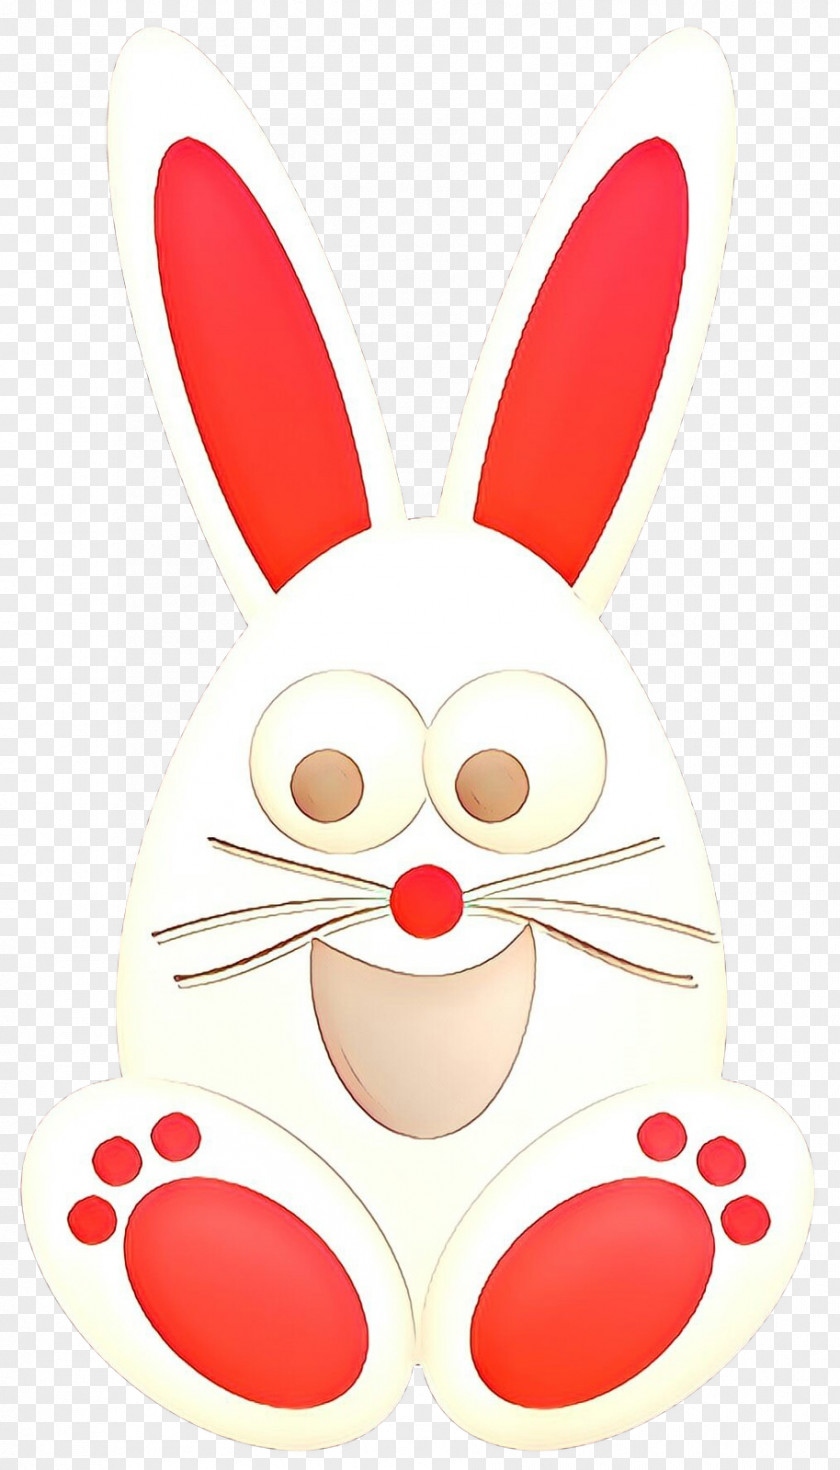 Rabbits And Hares Whiskers Easter Egg Background PNG